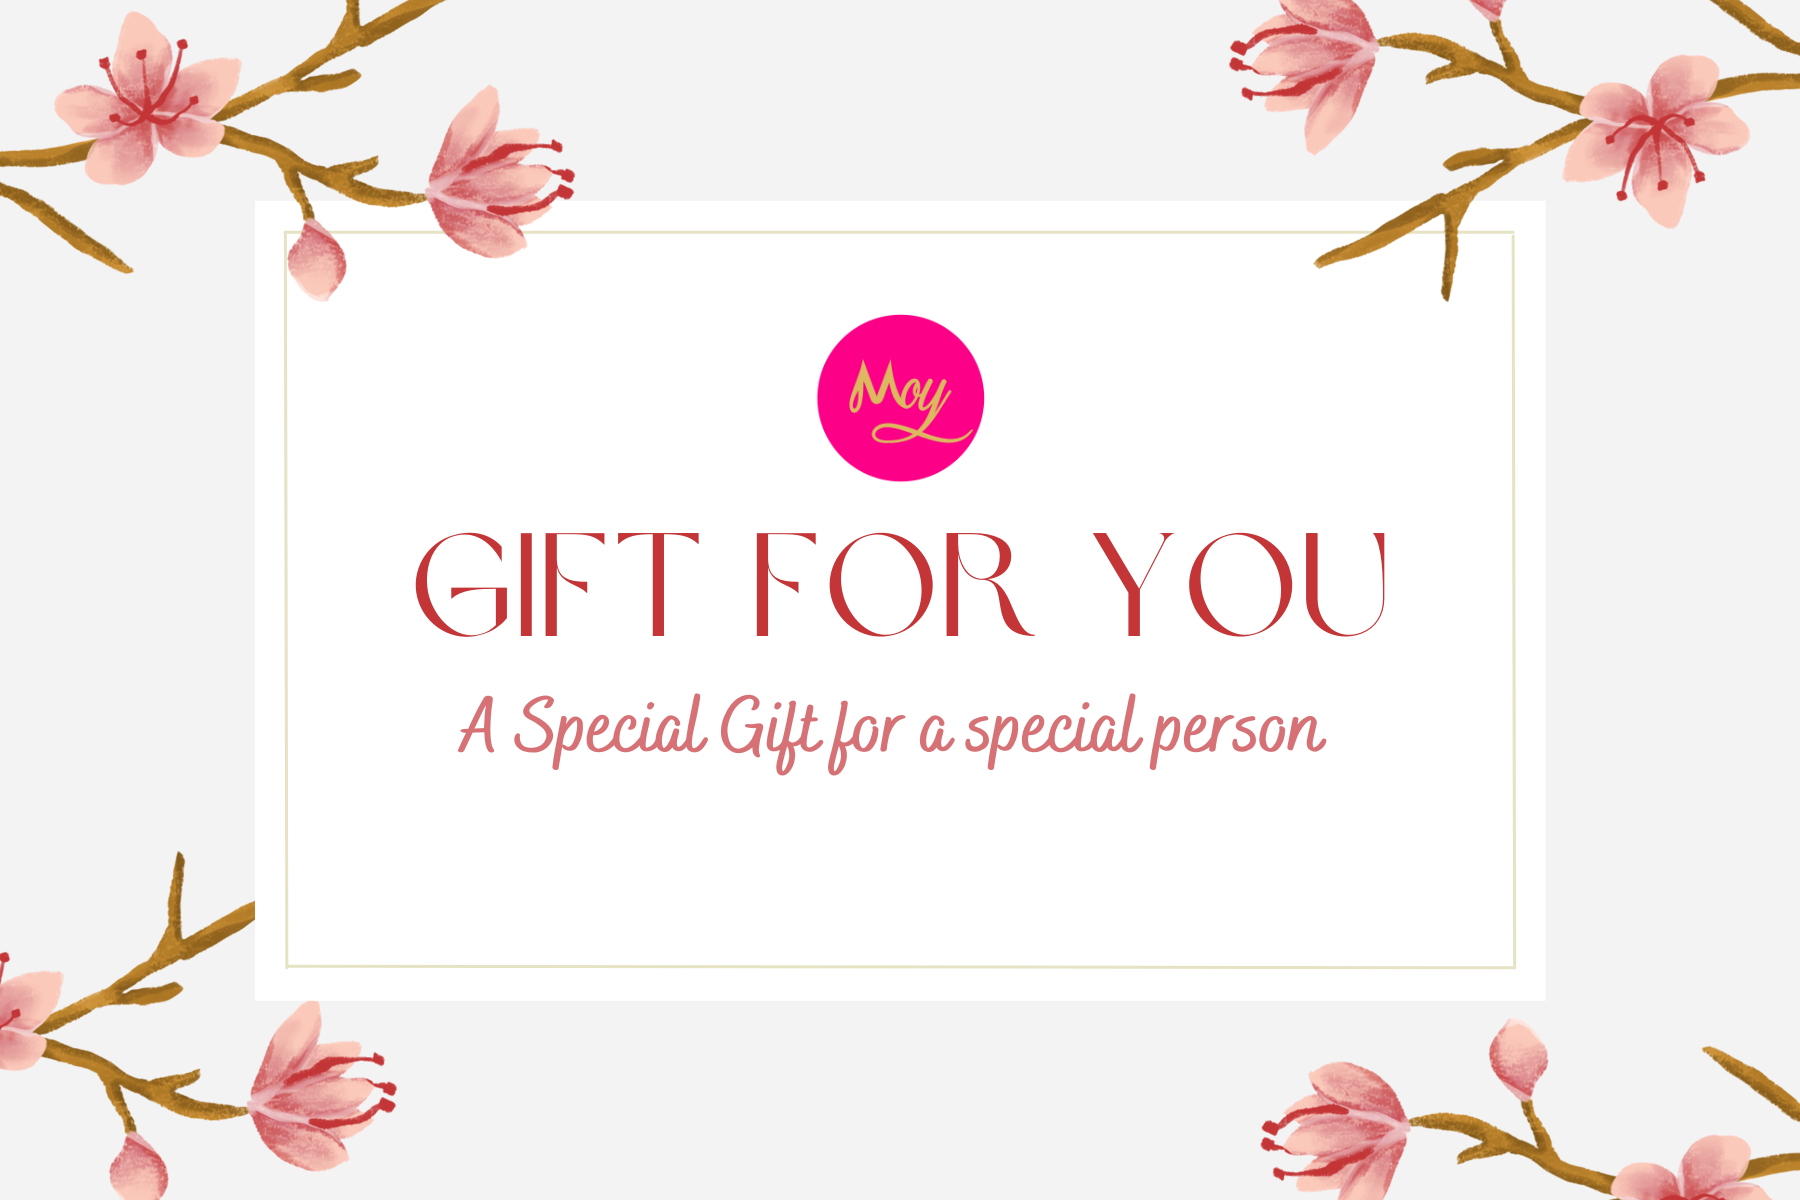 MOY Gift Card